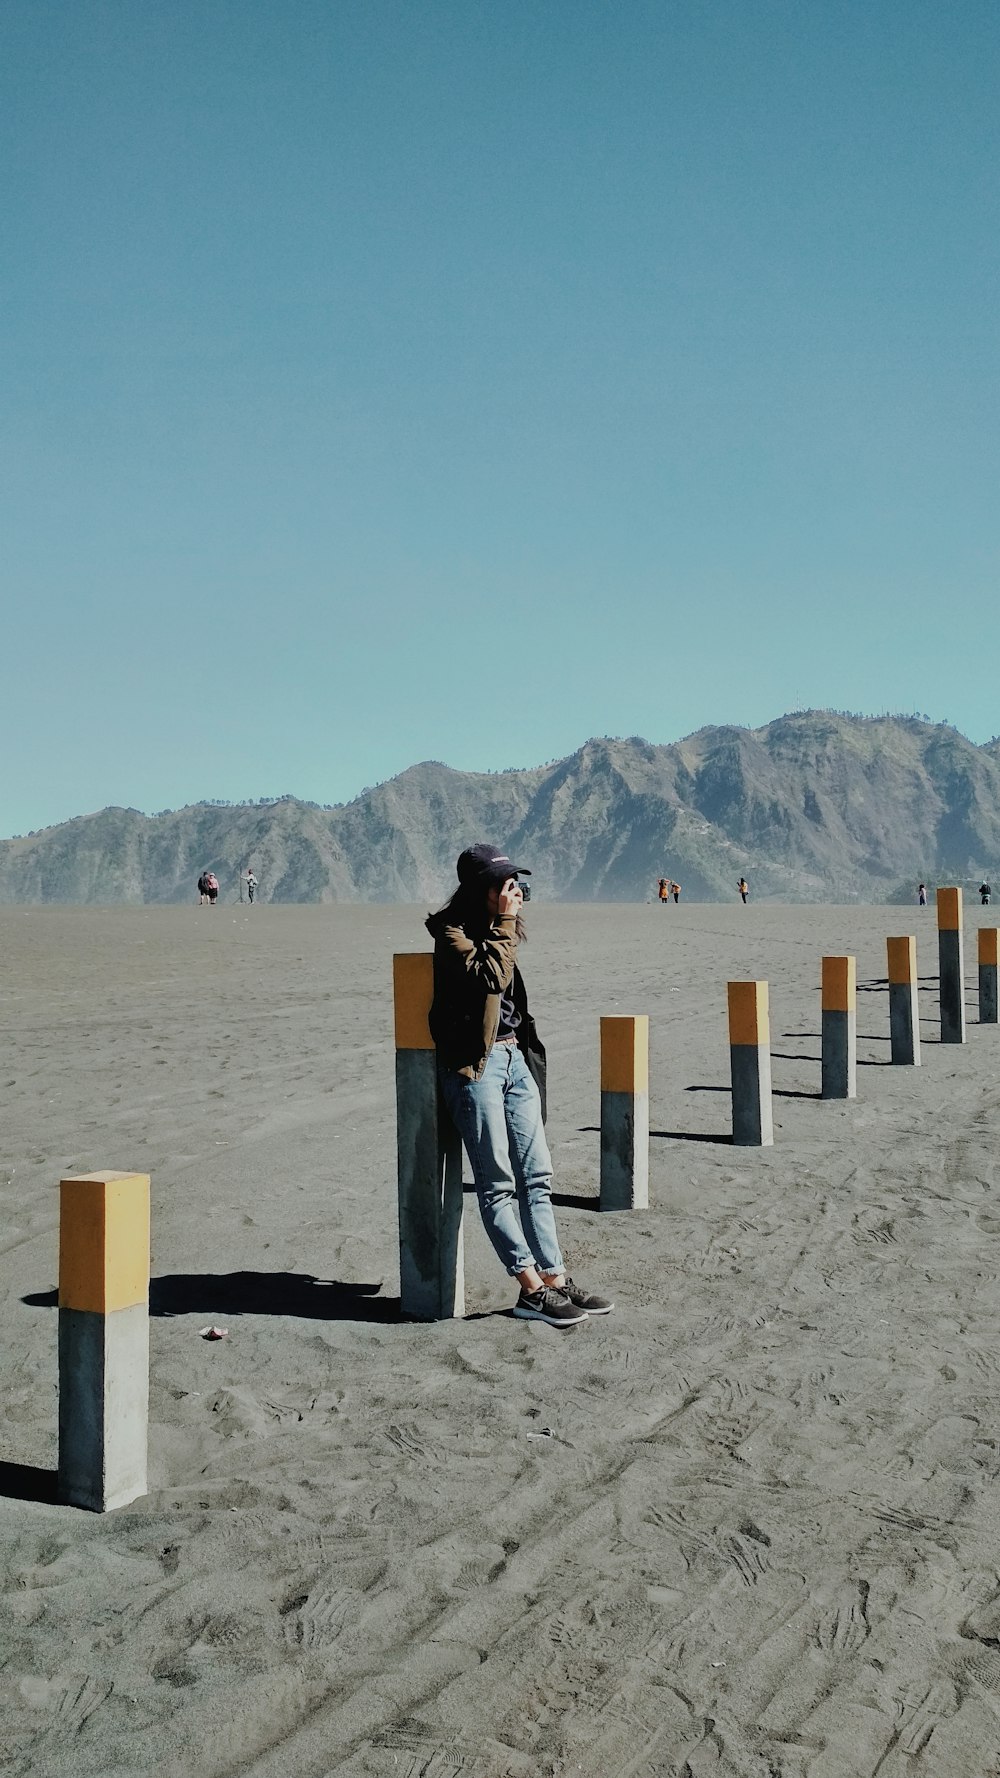 a person leaning against a post in the middle of a desert